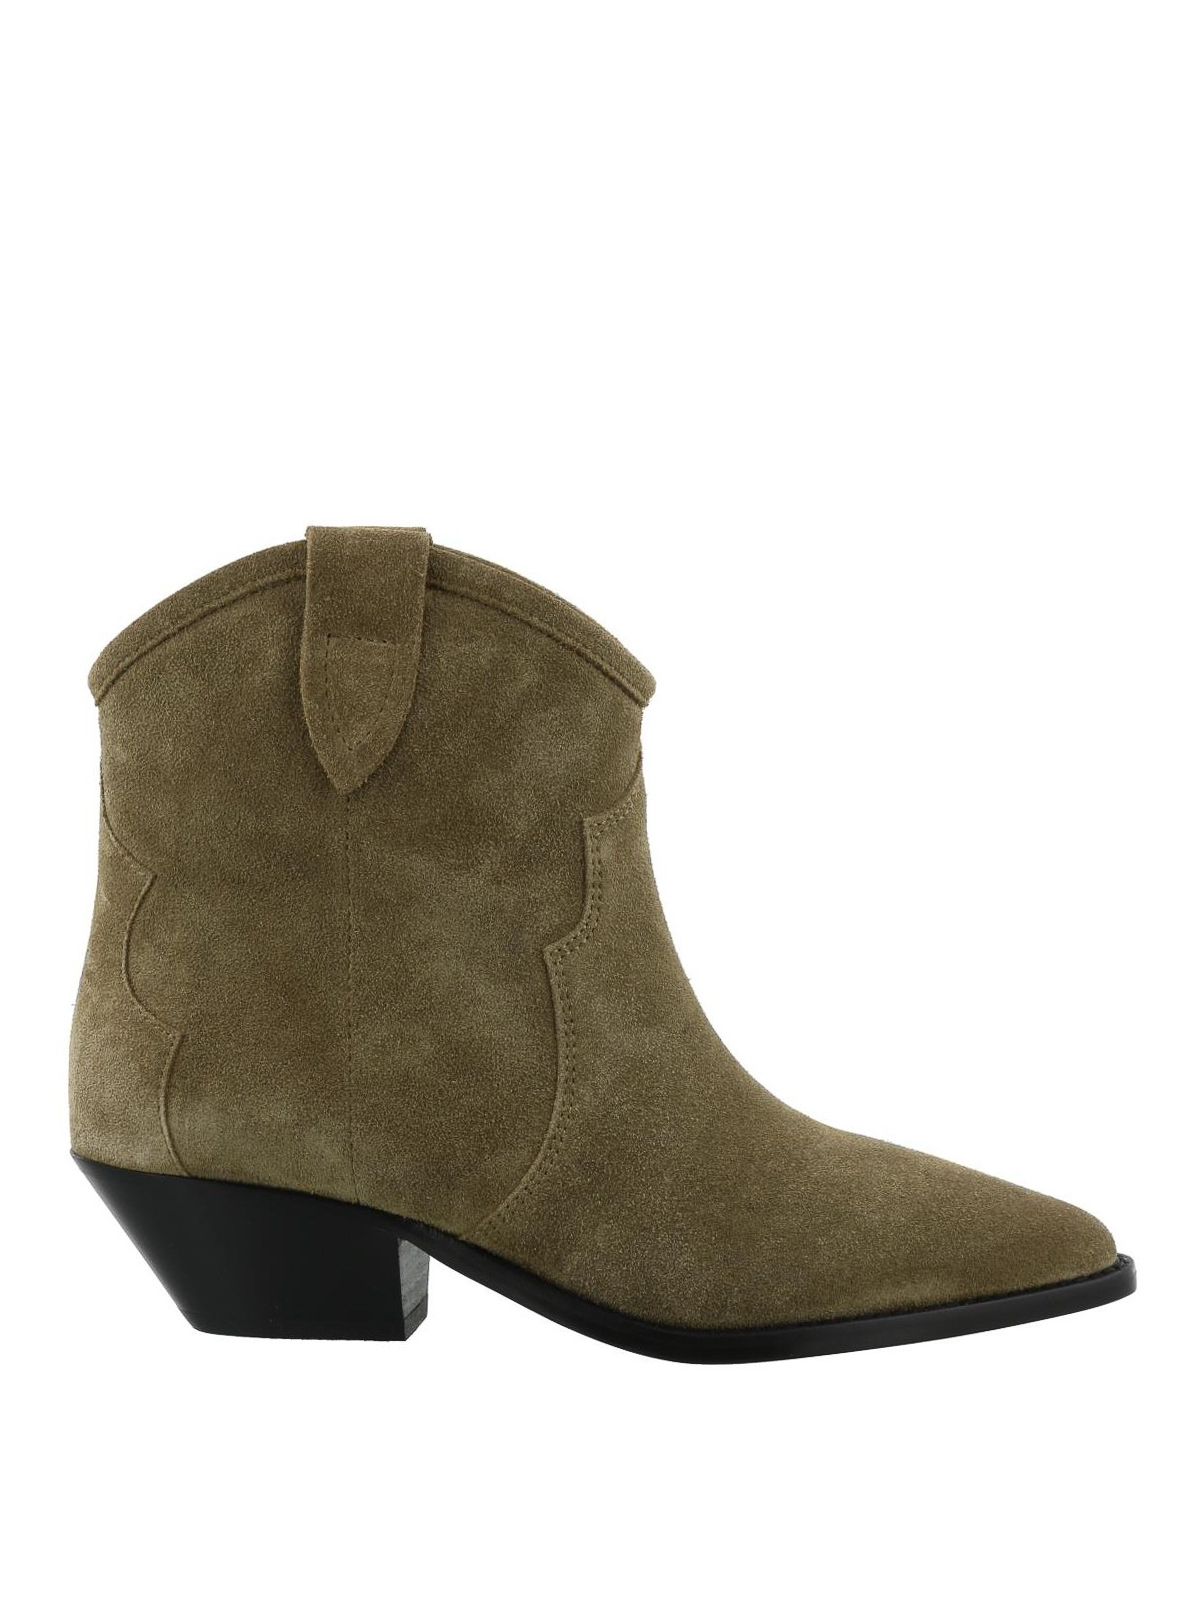 Isabel Marant - Dewina beige suede boots - ankle boots - BO017418A009S50TA